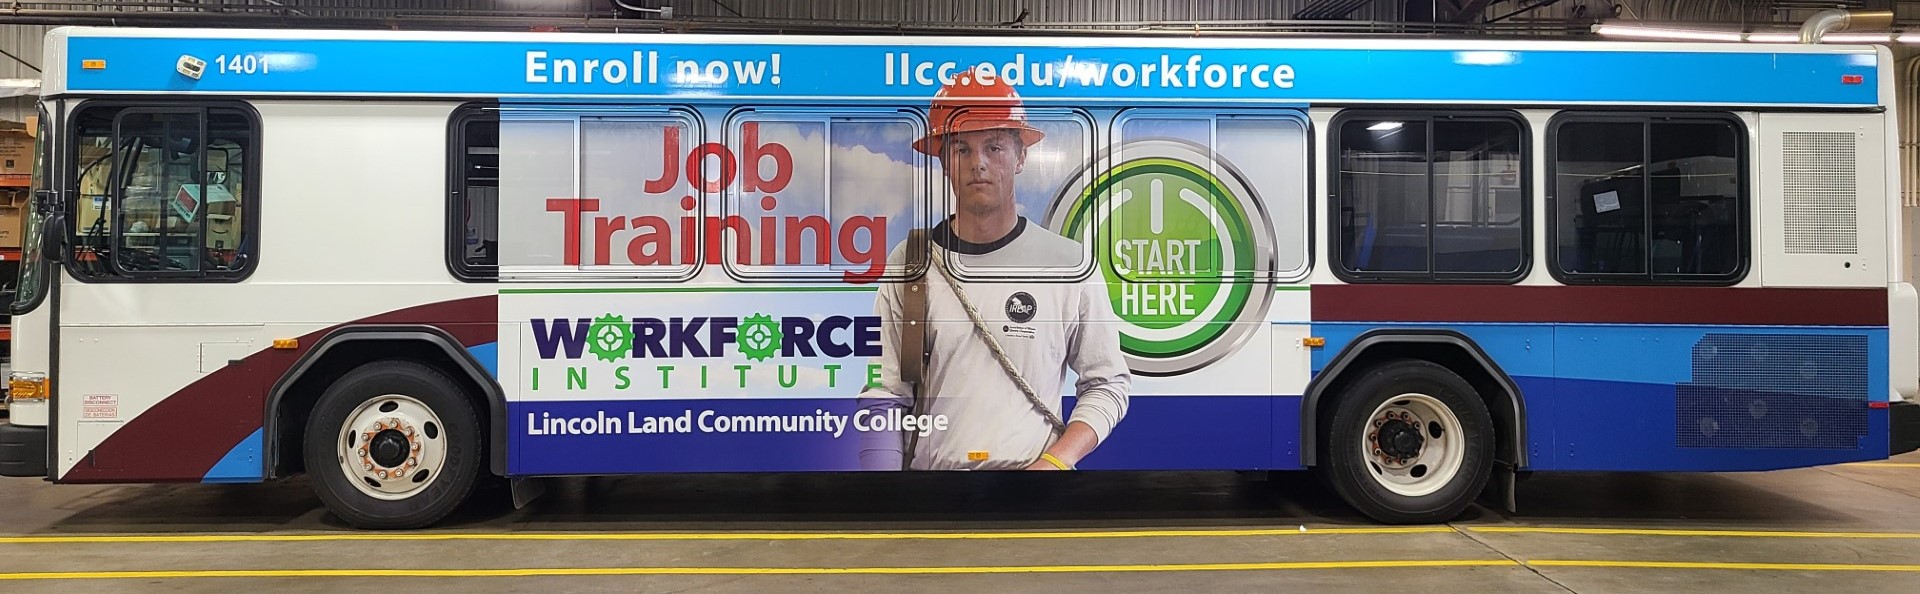 On side of bus: Job Training. Start Here button. Workforce Institute at Lincoln Land Community College. Enroll now! 